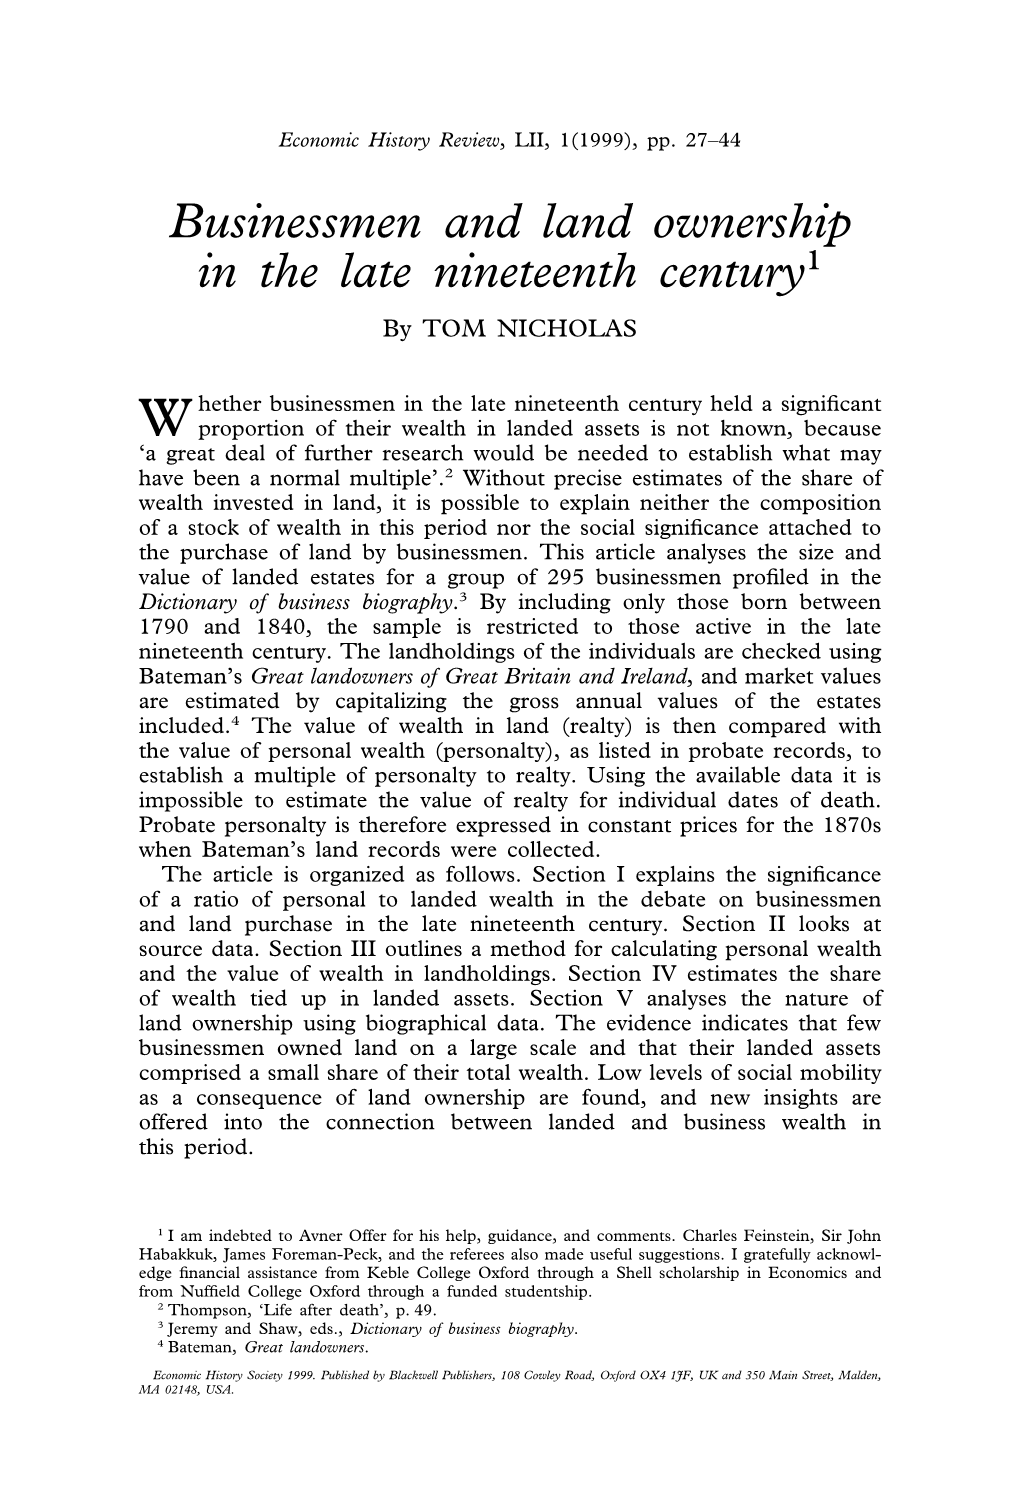 Businessmen and Land Ownership in the Late Nineteenth Century1 by TOM NICHOLAS